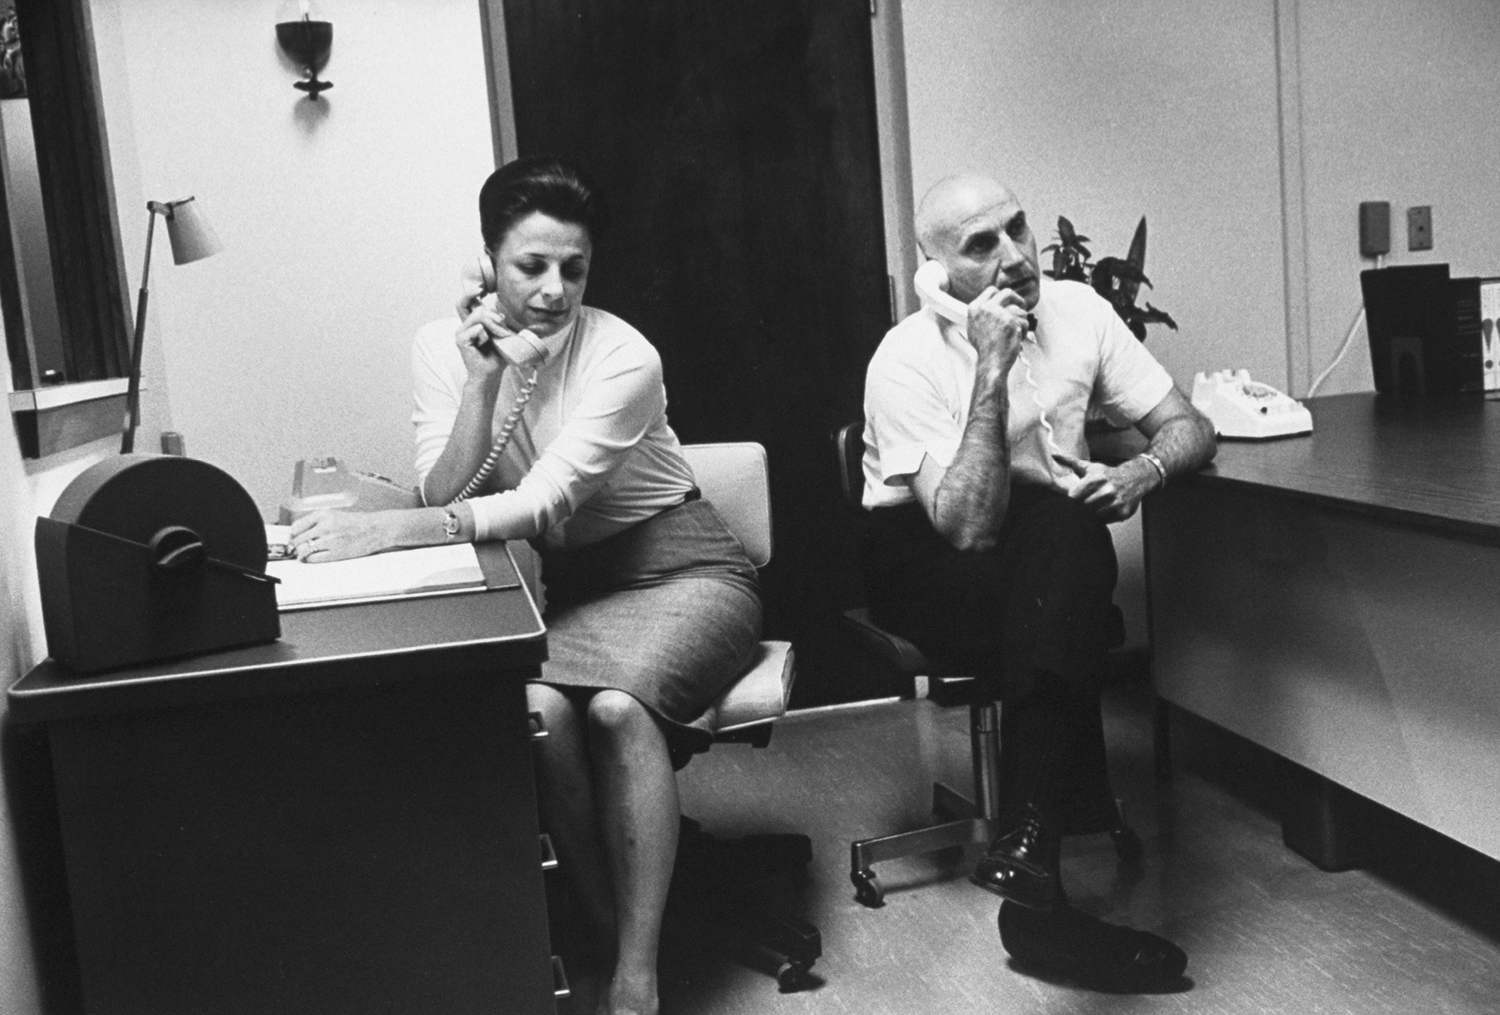 Participating in a radio program, Johnson and Masters answer telephoned questions.